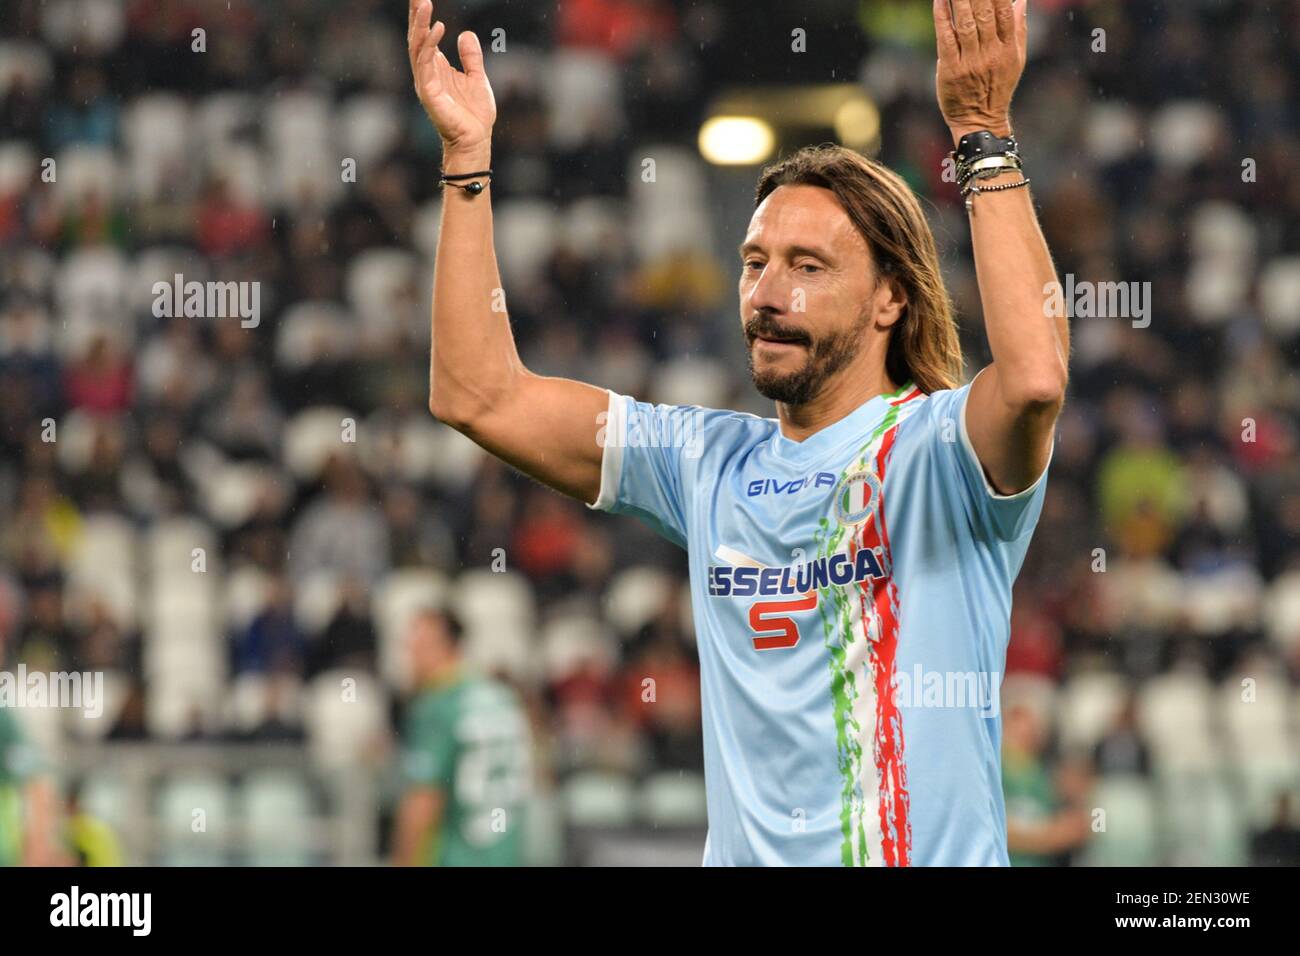 Bob Sinclar of Italian National Singers seen making gestures during the ' Partita Del Cuore' Charity Match at Allianz Stadium. Campioni Per La  Ricerca win the "Champions for Research" 3-2 against the "Italian